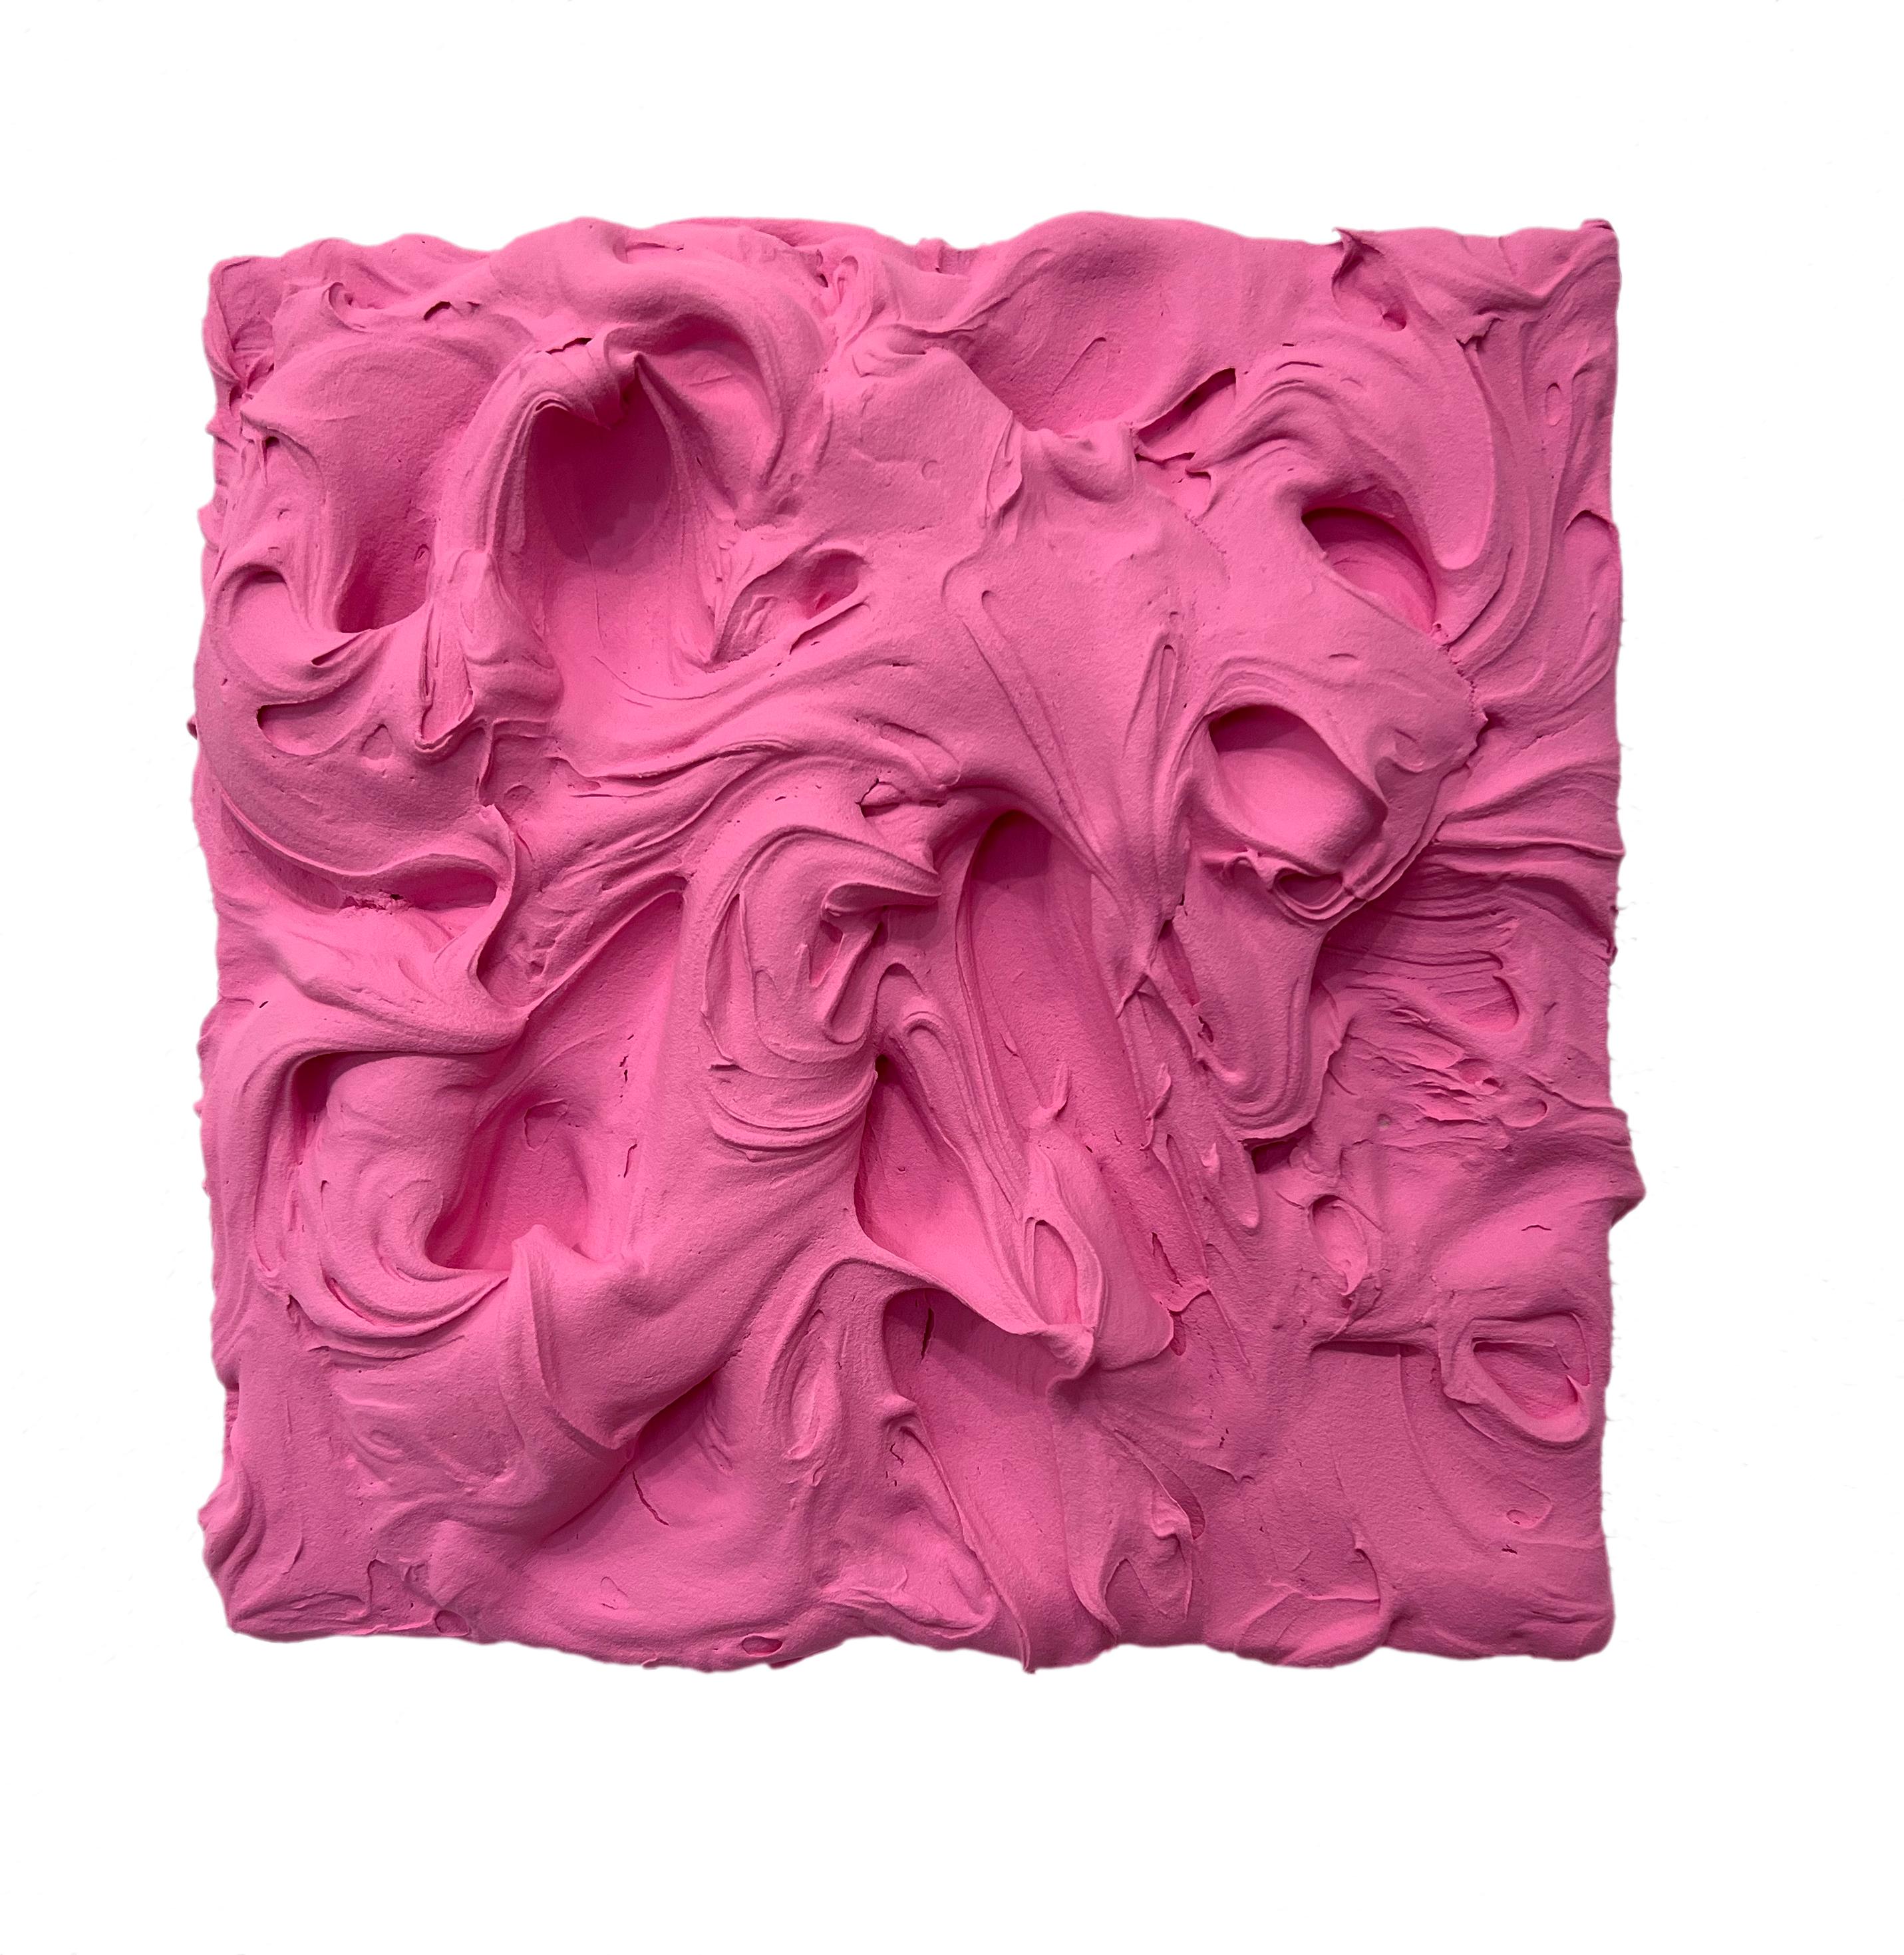 "Sweet Pink" Excess Wall Sculpture, monochrome, hot pink, maximalism, bold - Mixed Media Art by Chloe Hedden